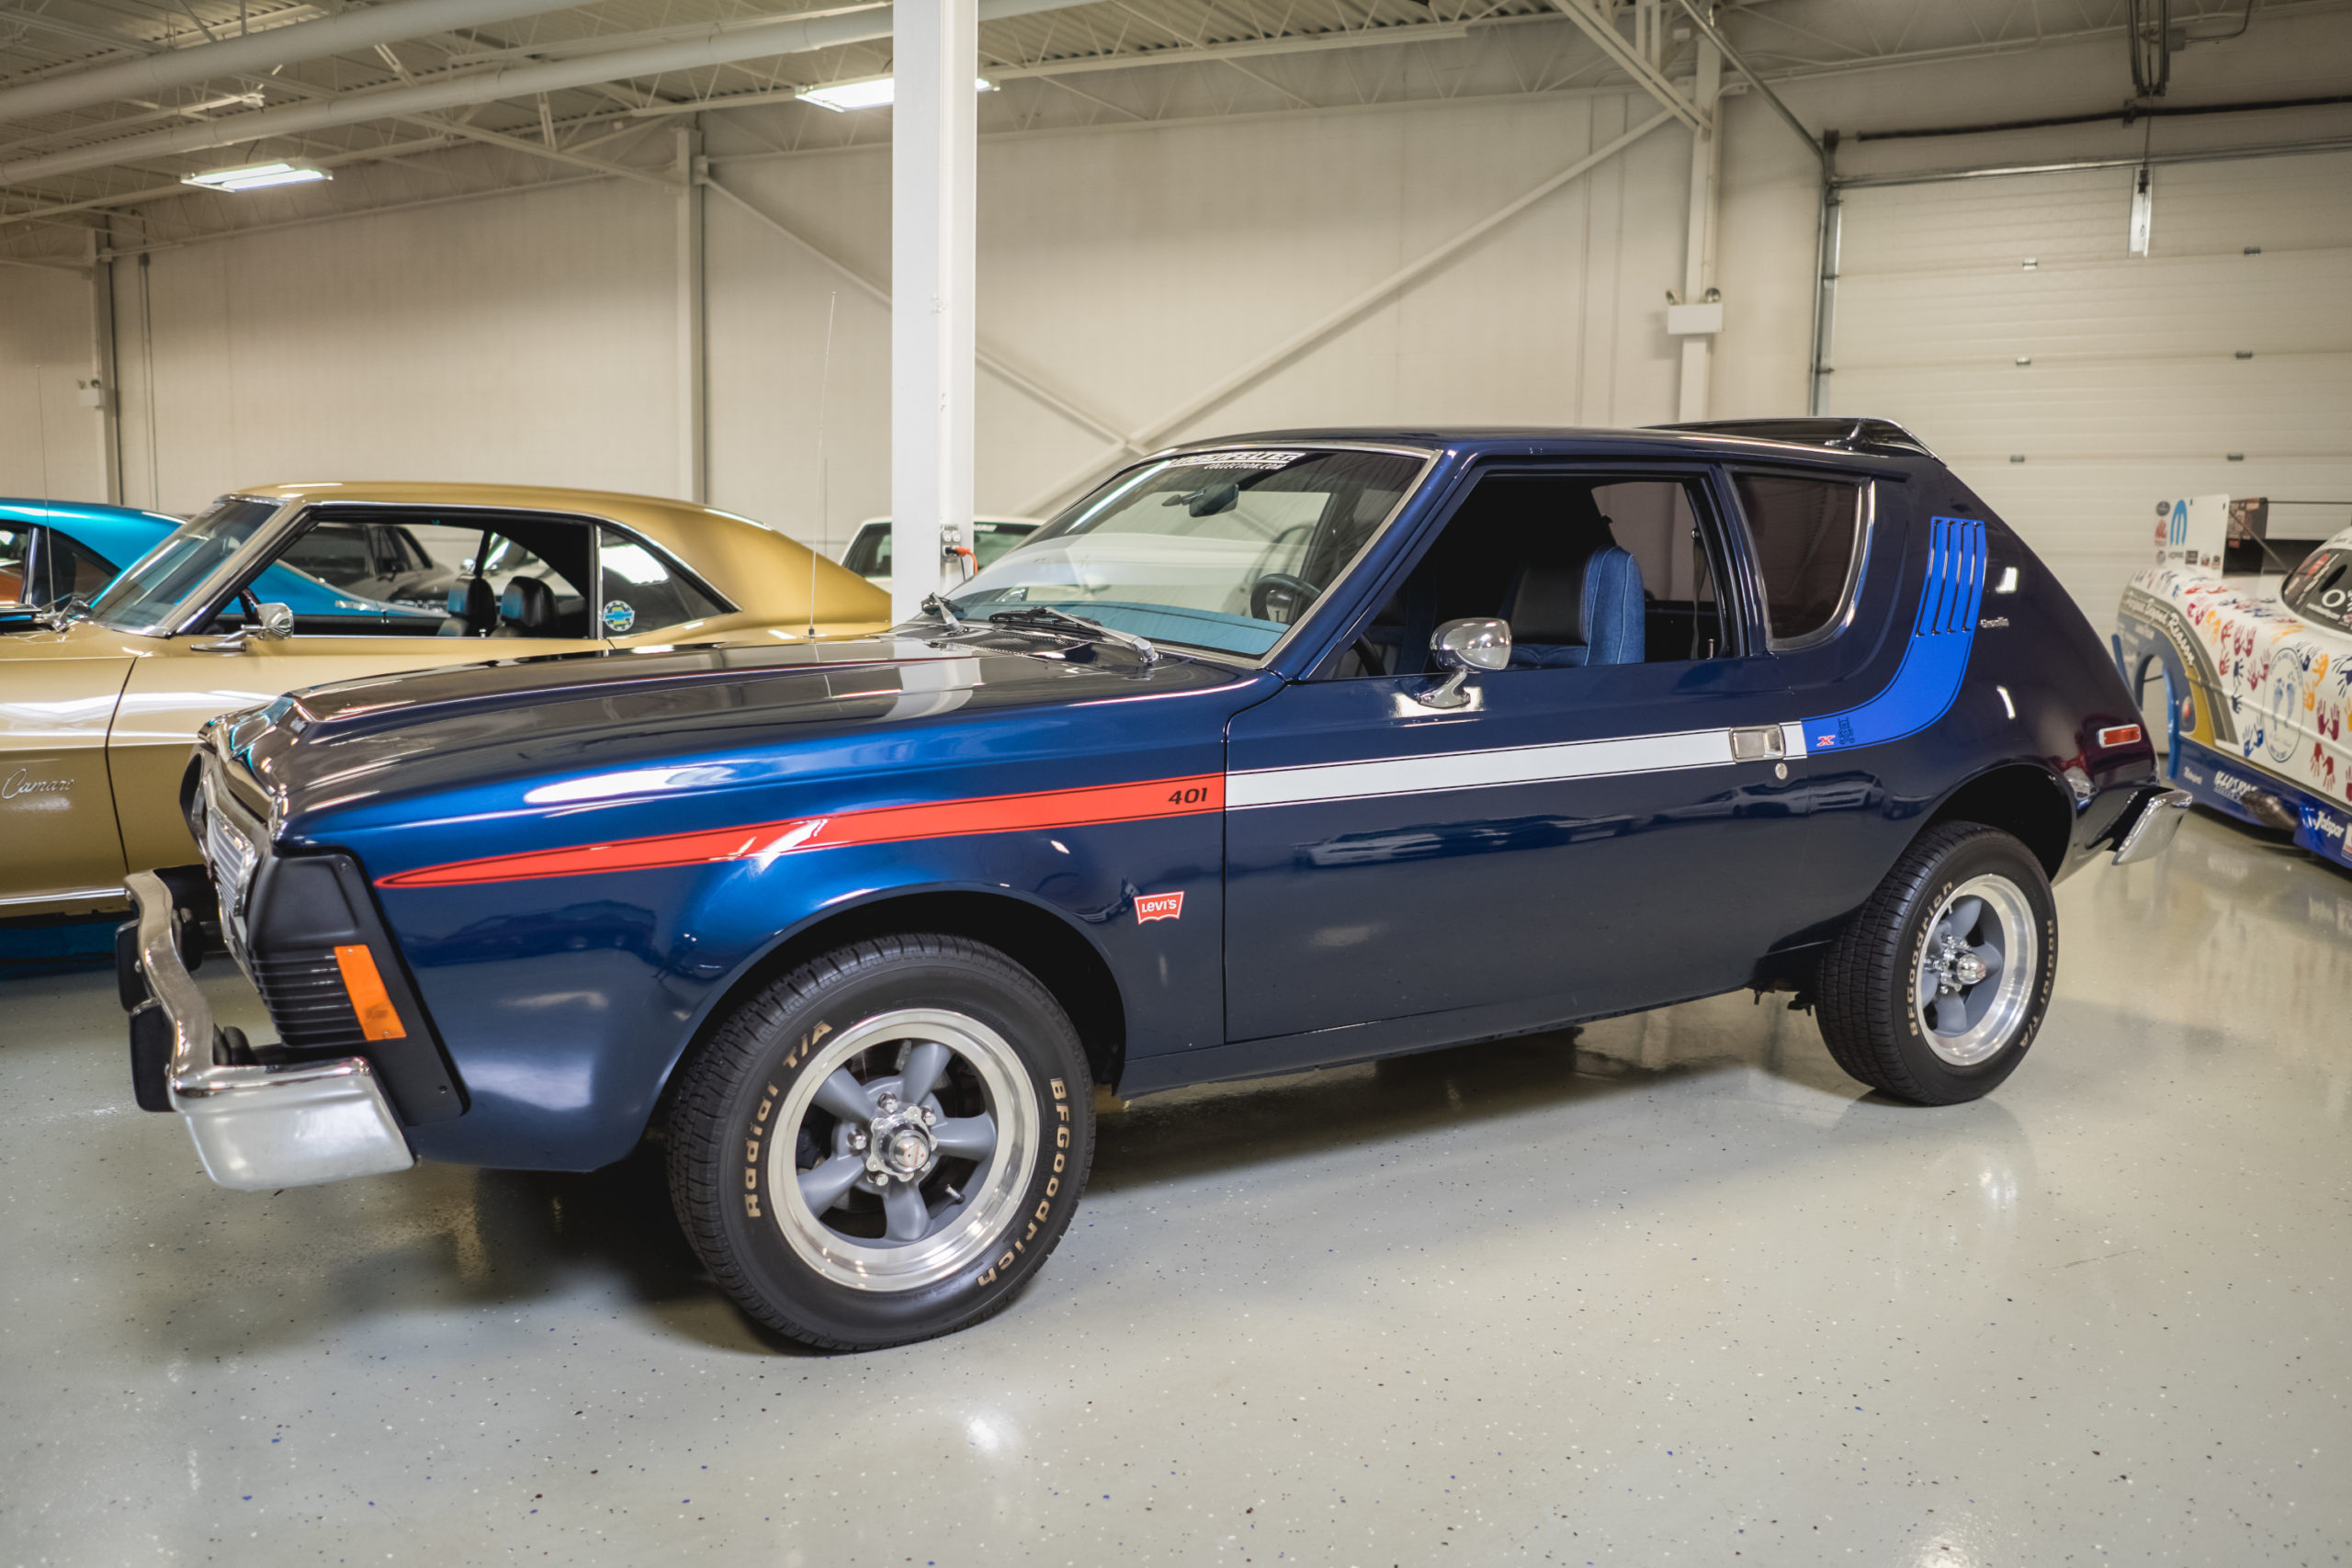 1974 AMC Gremlin 401-XR Tribute – The Lingenfelter Collection